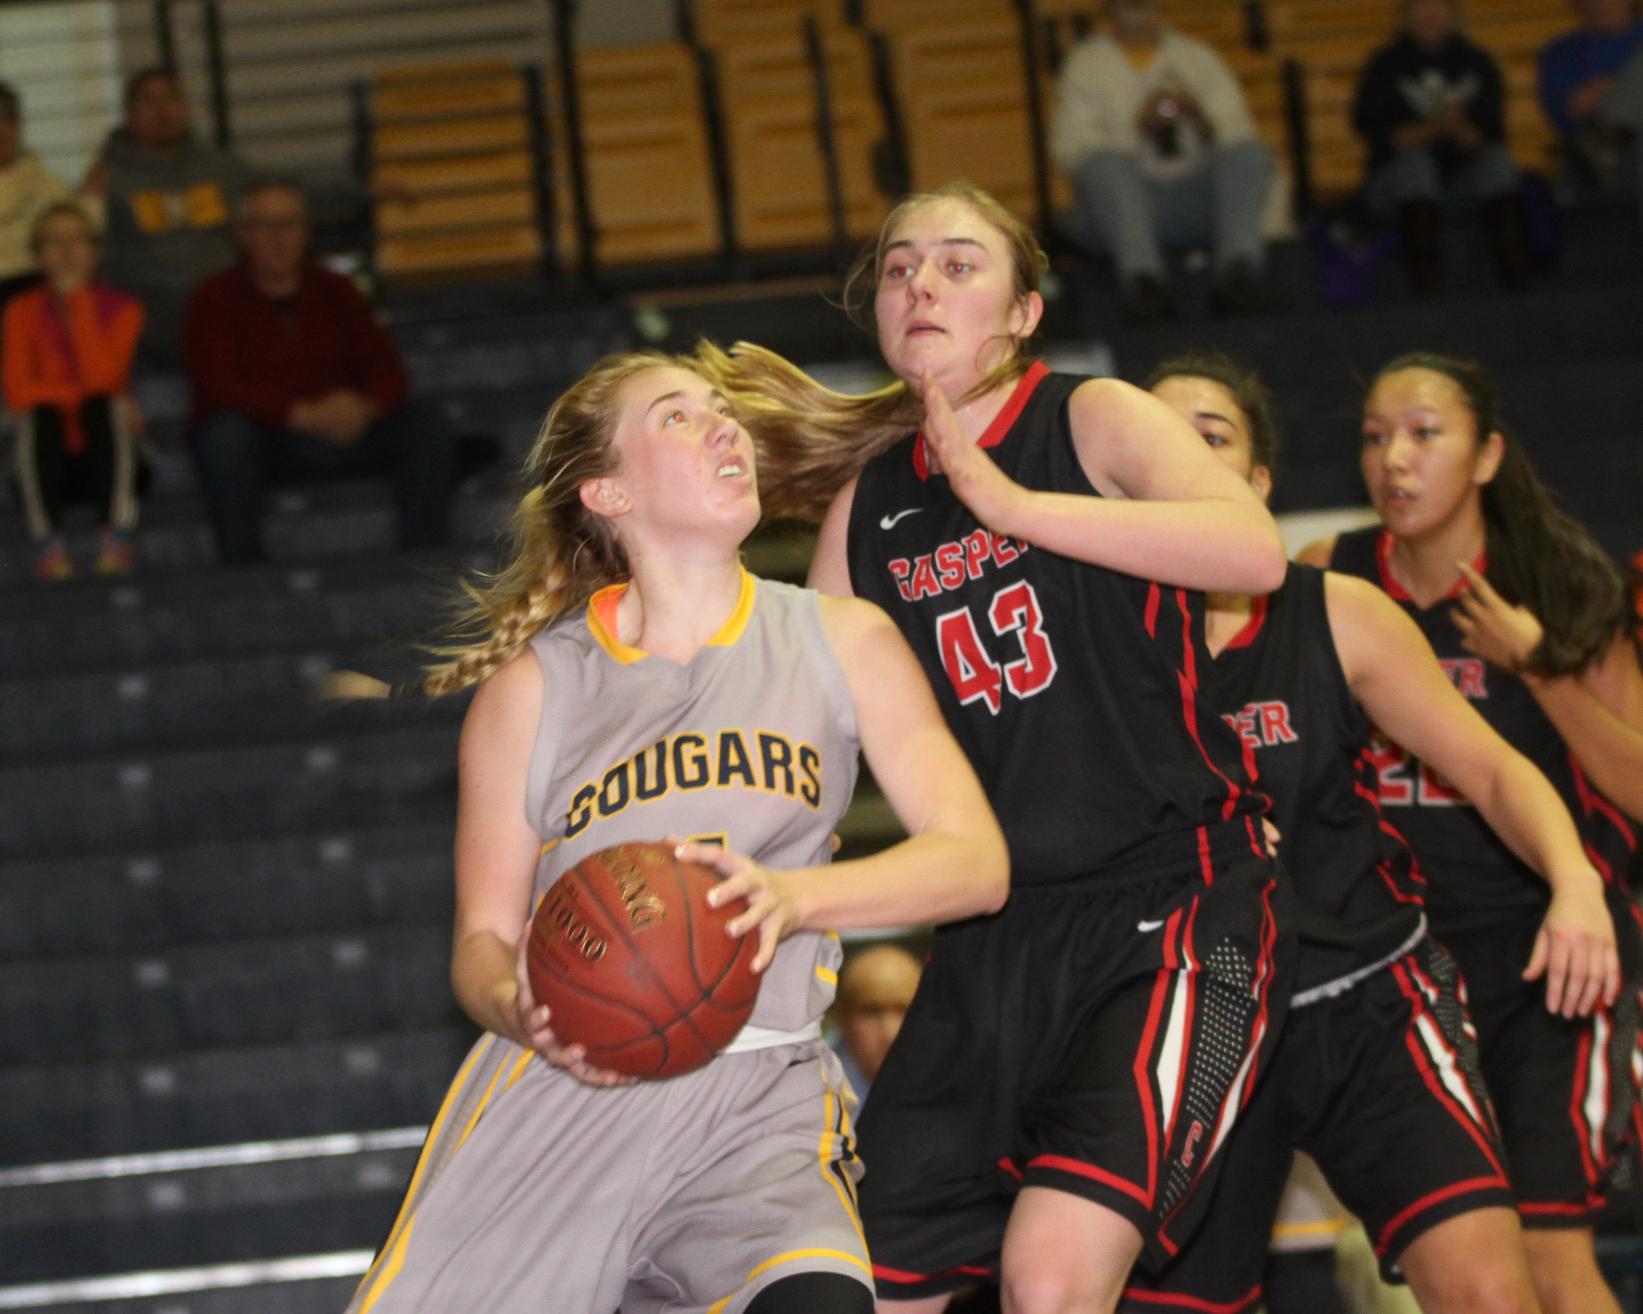 WNCC women capture 10th win of season with 80-42 win over Central Wyoming